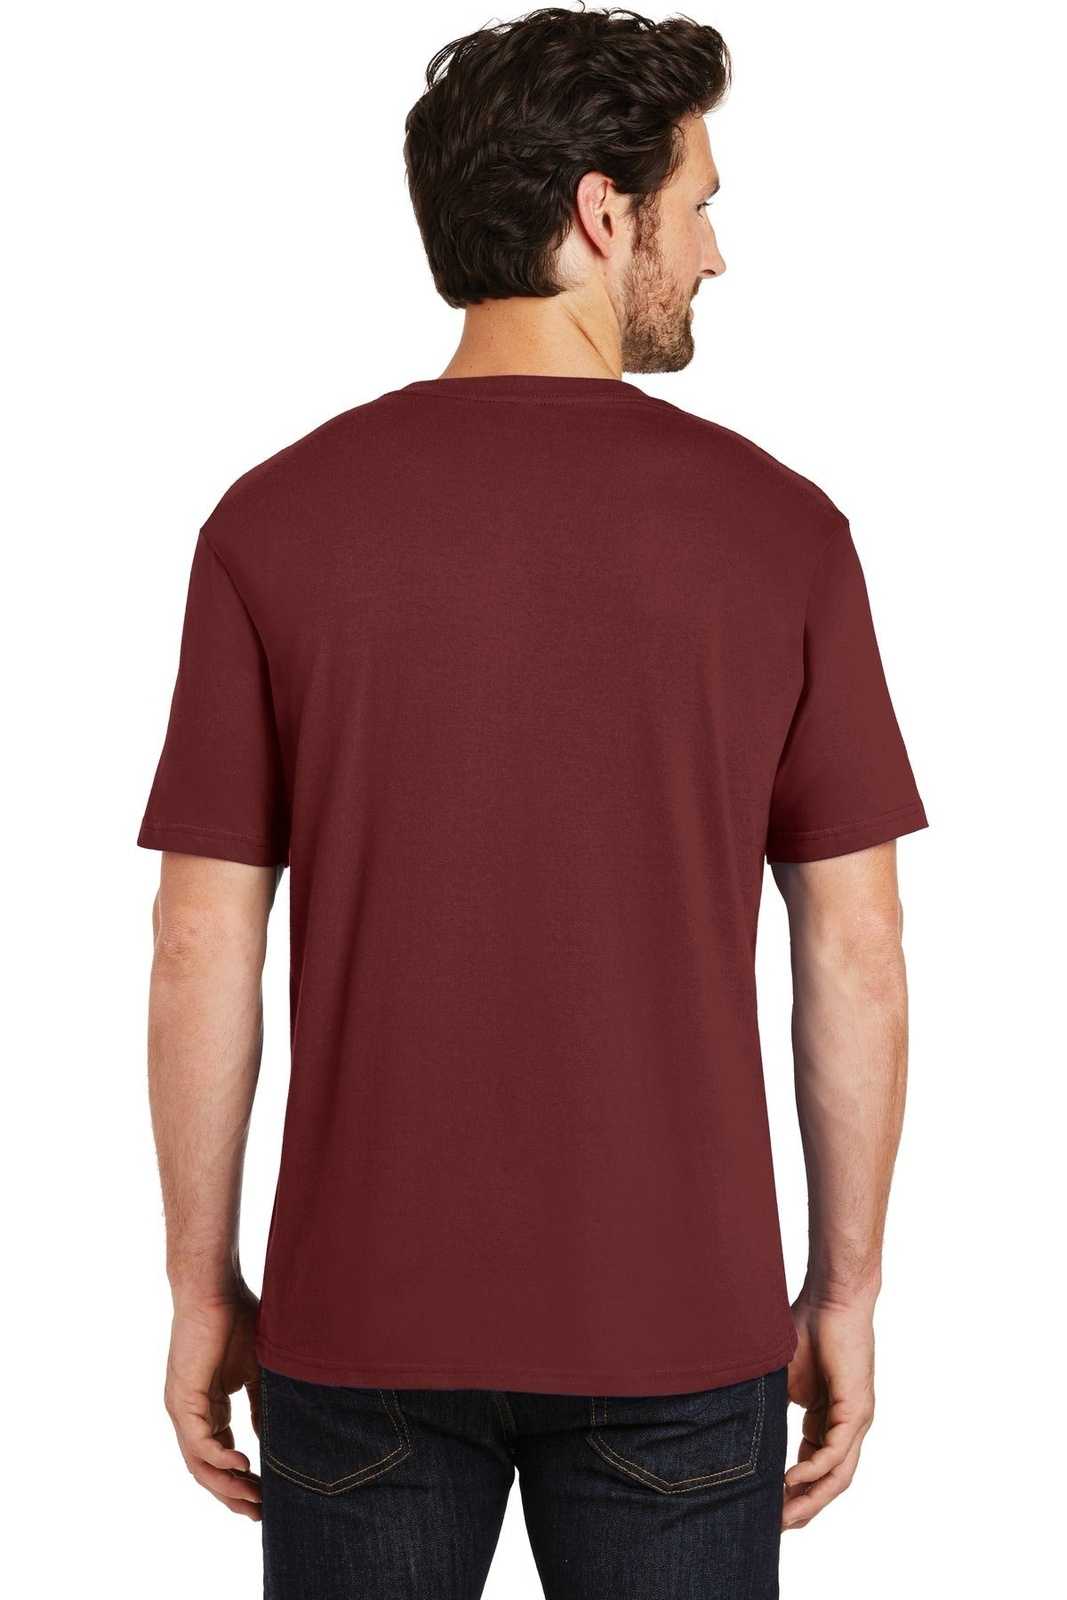 District DT104 Perfect Weight Tee - Sangria - HIT a Double - 1